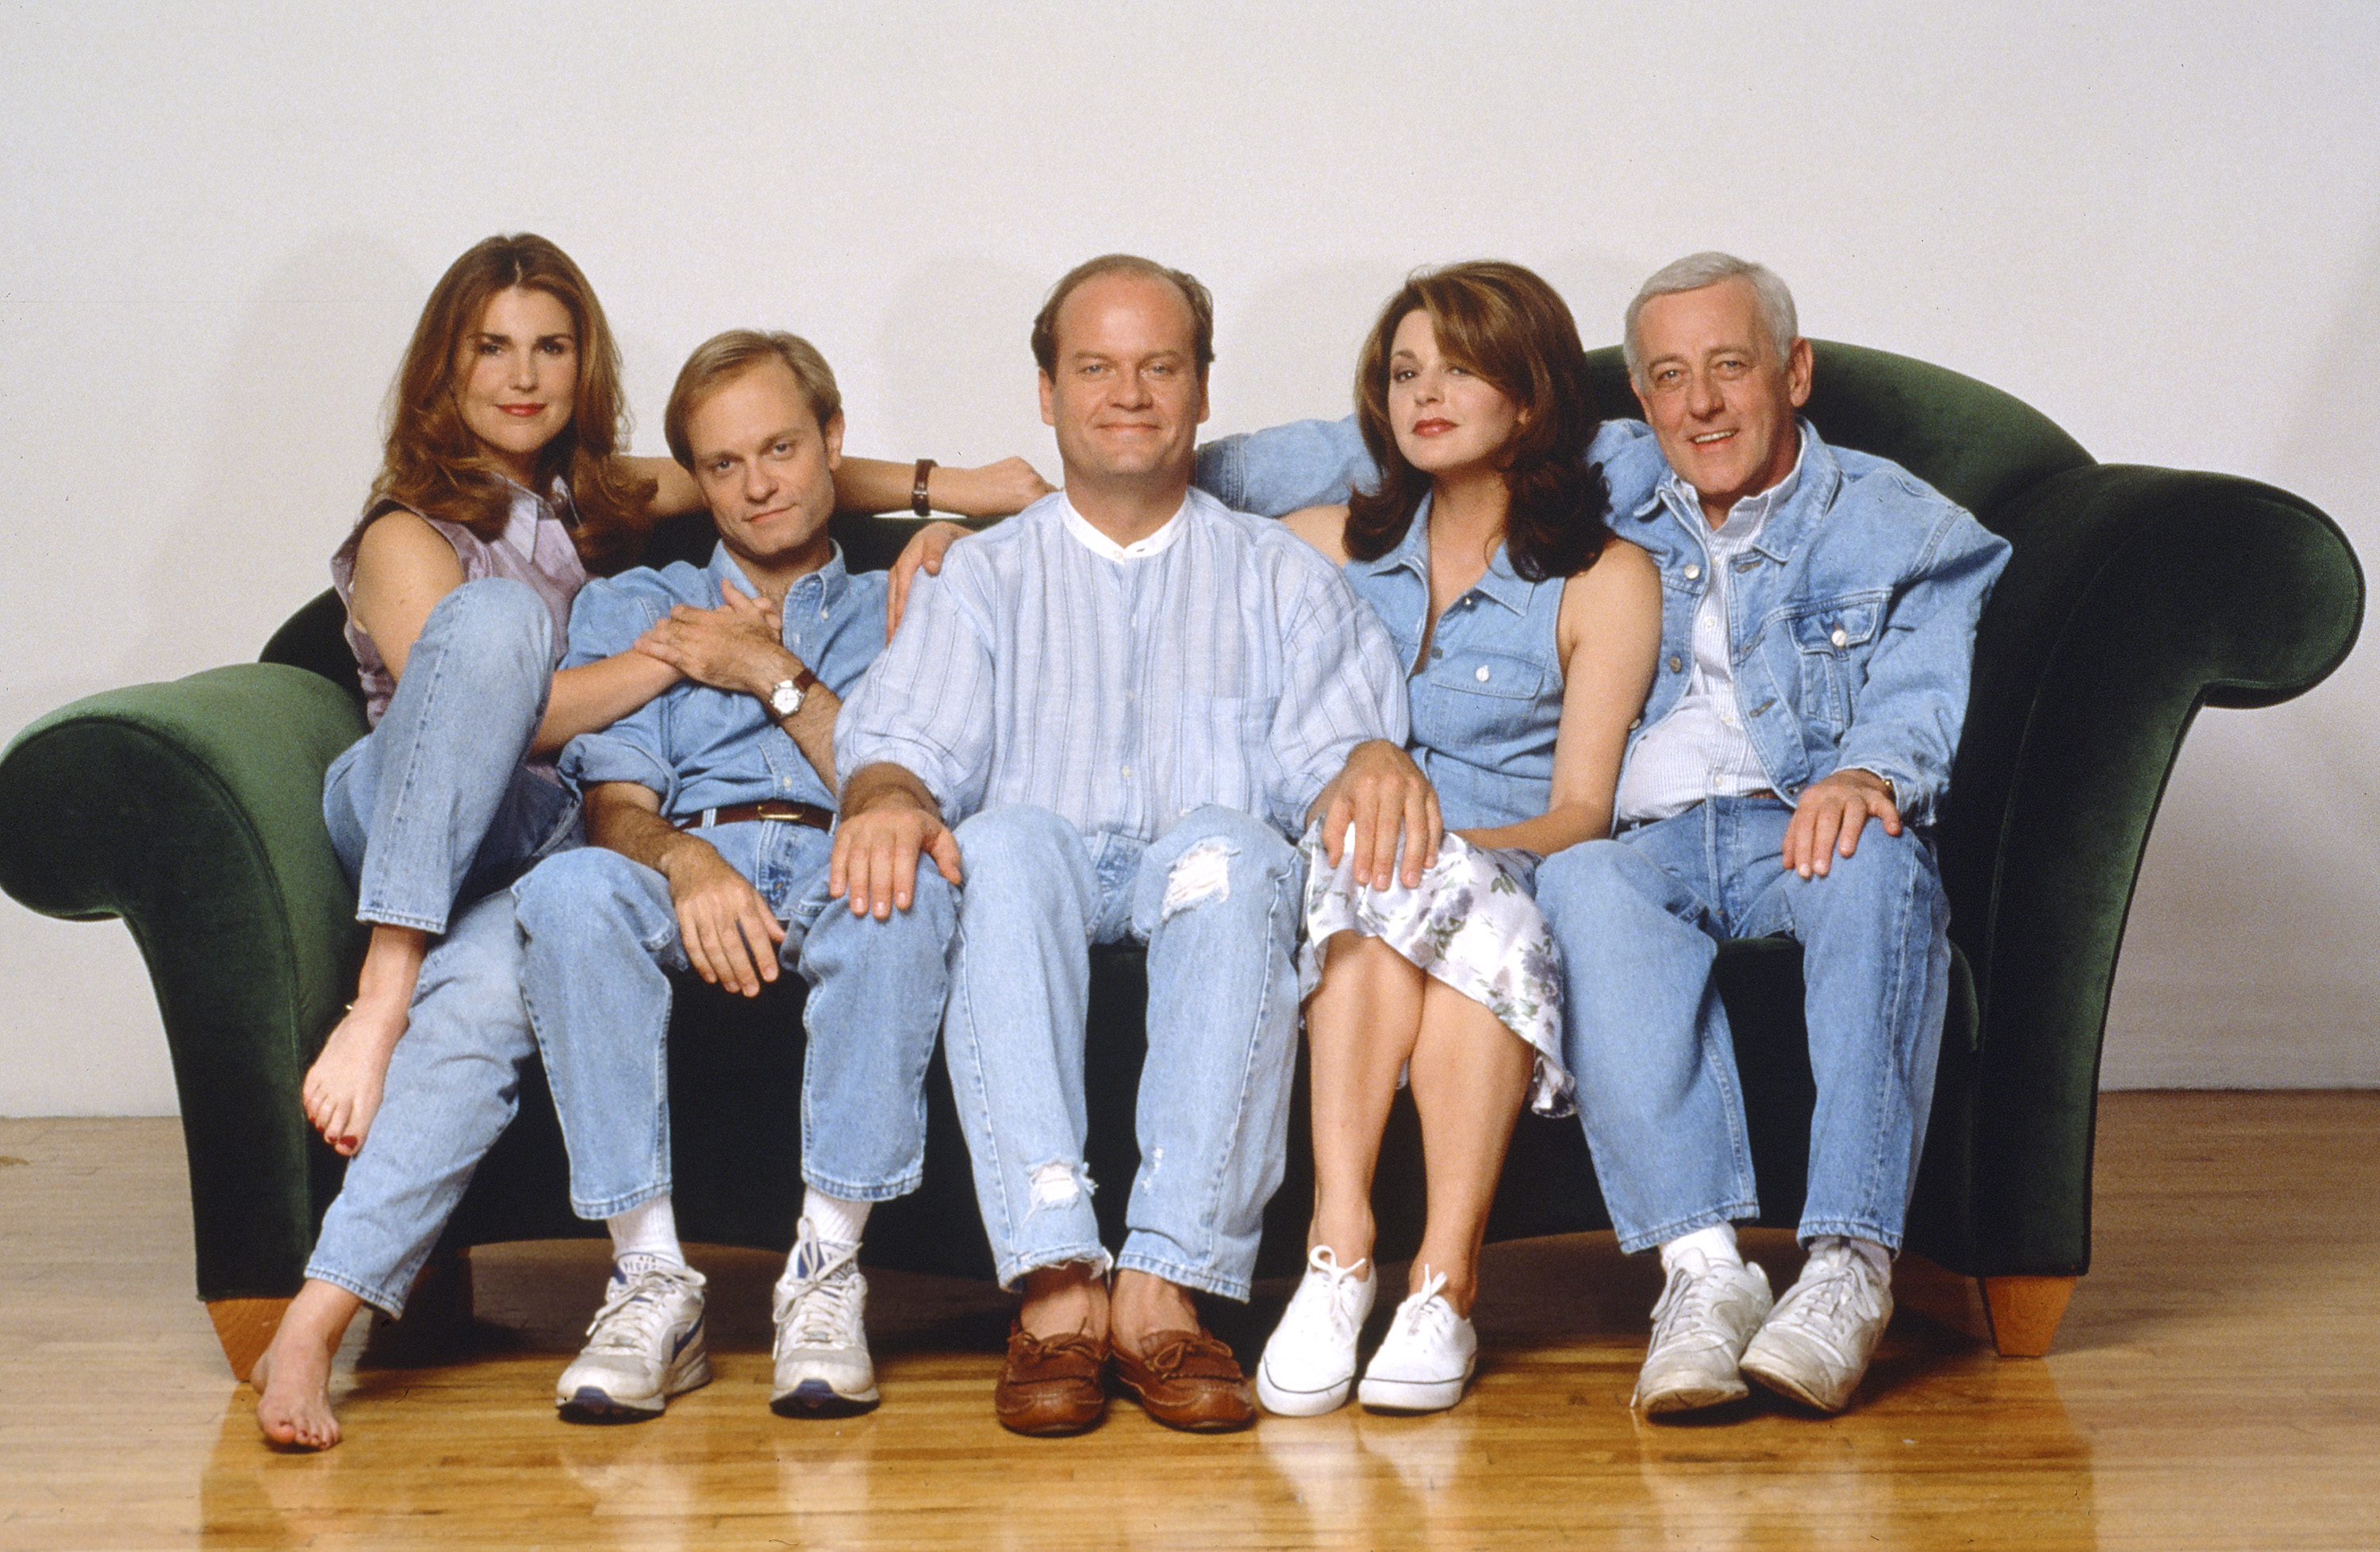 Peri Gilpin as Roz Doyle, David Hyde Pierce as Doctor Niles Crane, Kelsey Grammer as Doctor Frasier Crane, Kelsey Grammer as Doctor Frasier CraneJane Leeves as Daphne Moon and John Mahoney as Martin Crane in a promotional photo